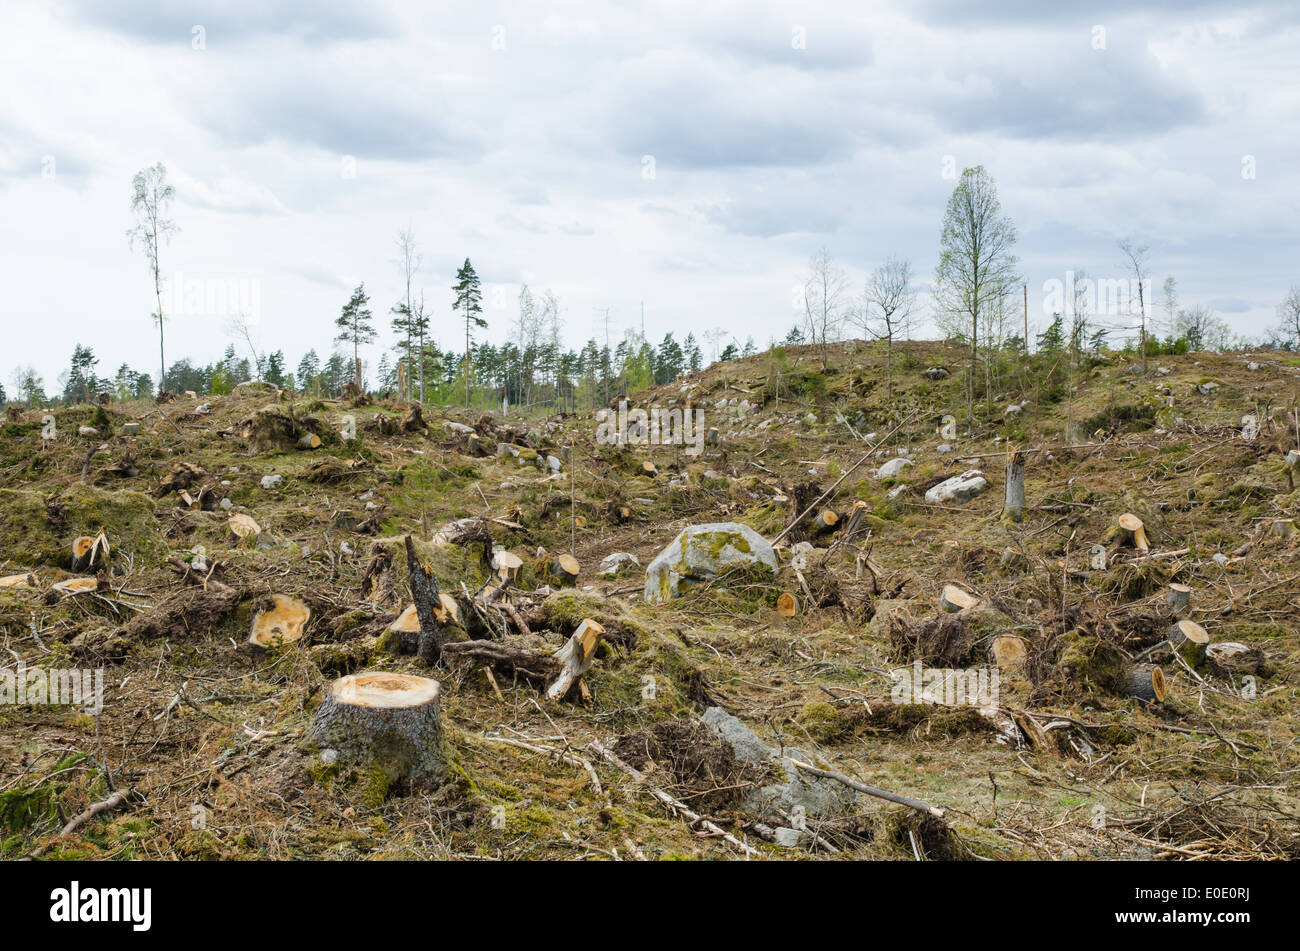 Stumps at a clear cut forest area Stock Photo